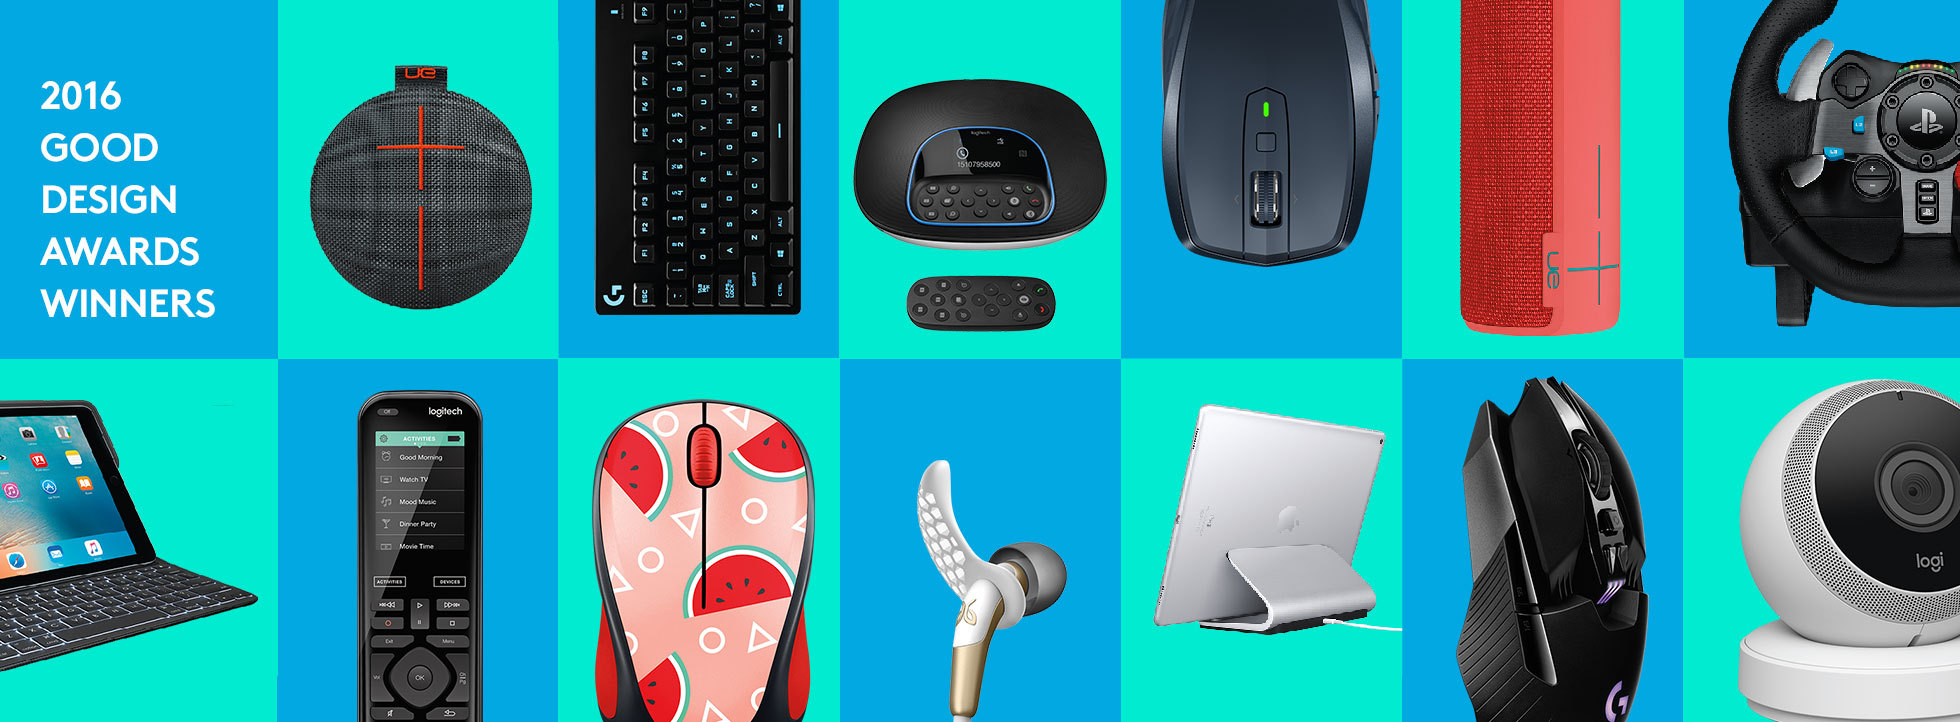 Forbigående Mose kantsten Logitech Sets Company Record With 15 GOOD DESIGN 2016 Awards | Business Wire